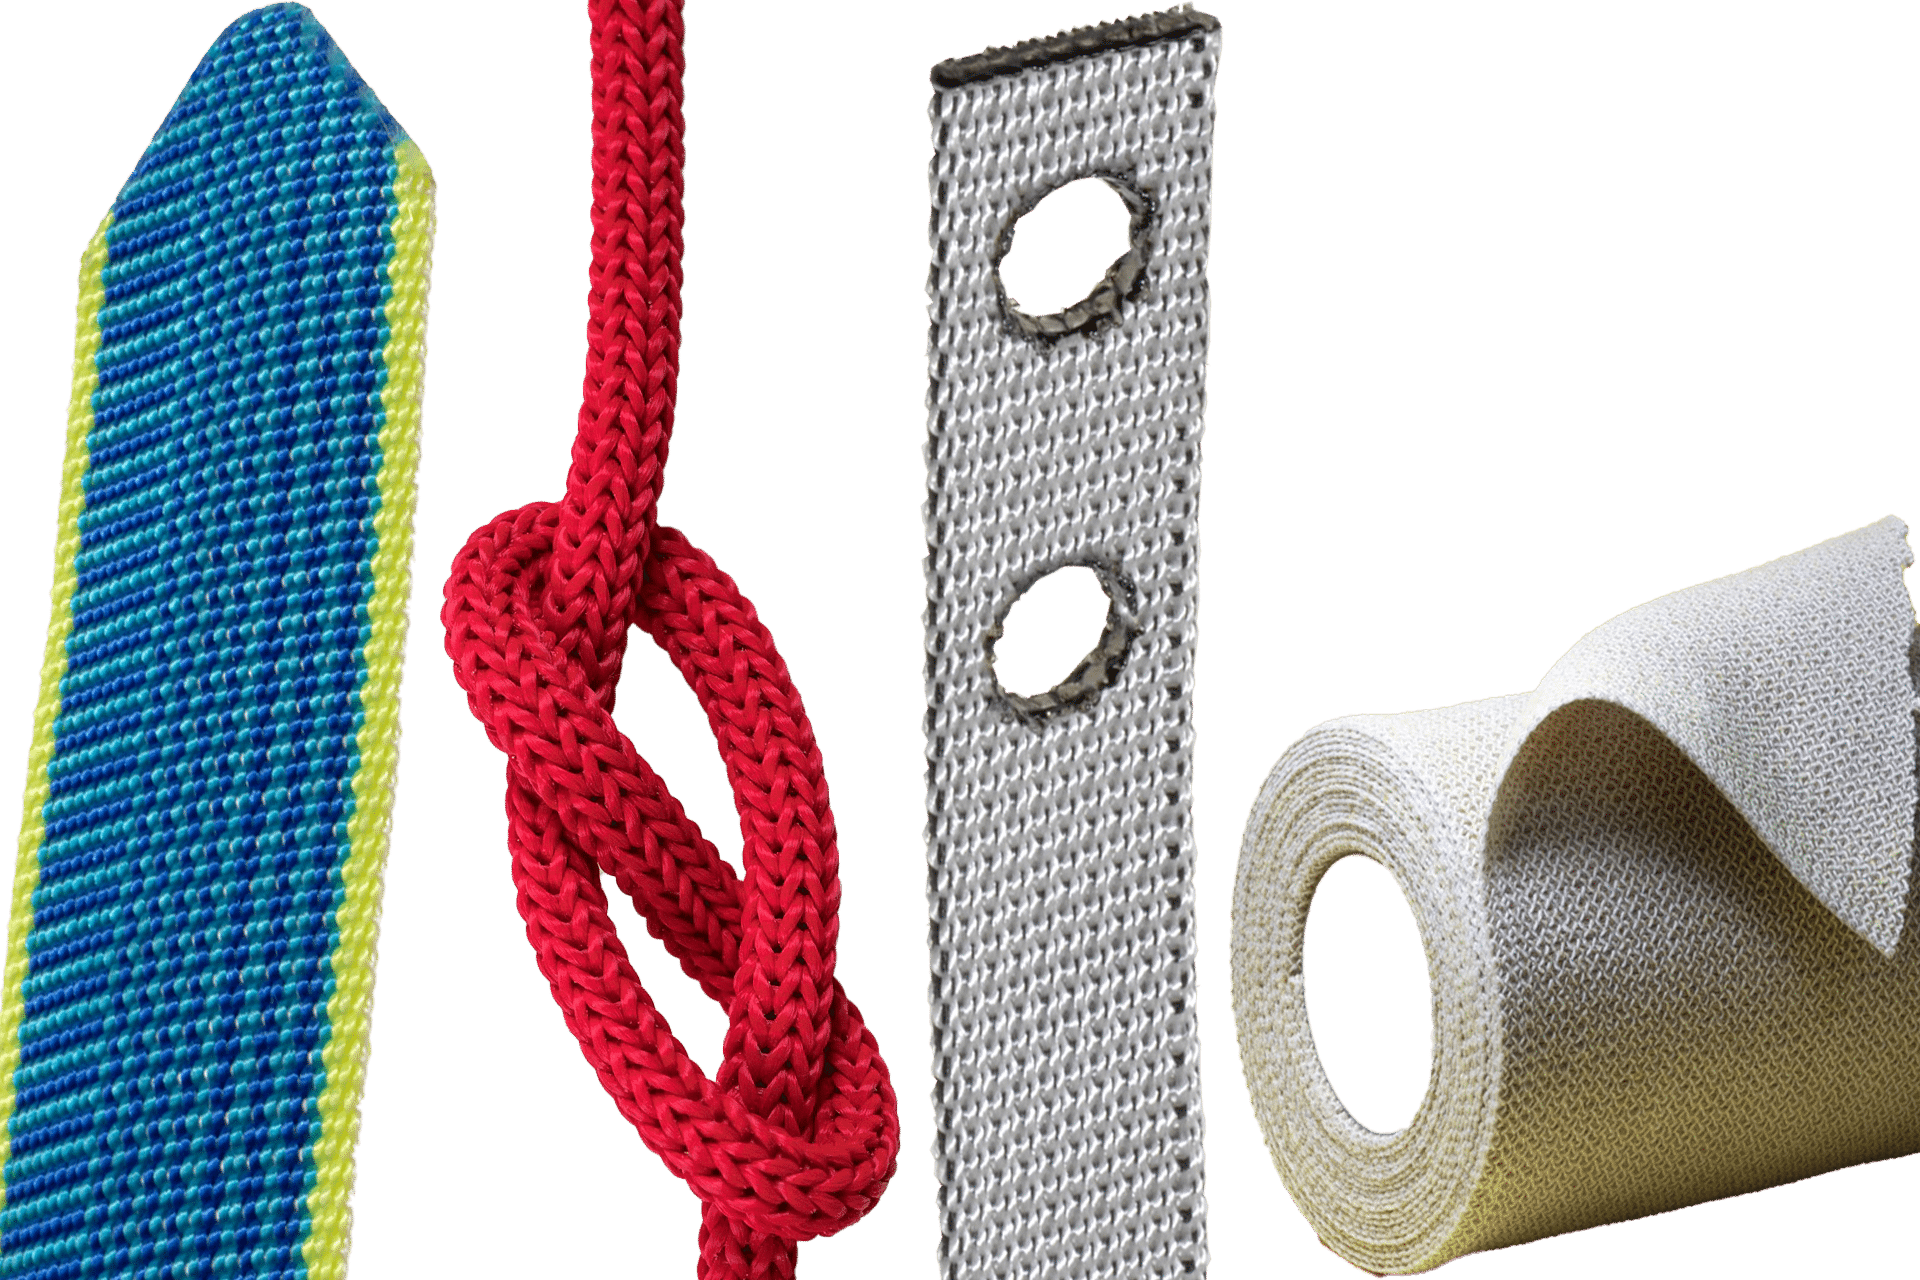 Technical textils: Belts, ropes, wound dressing